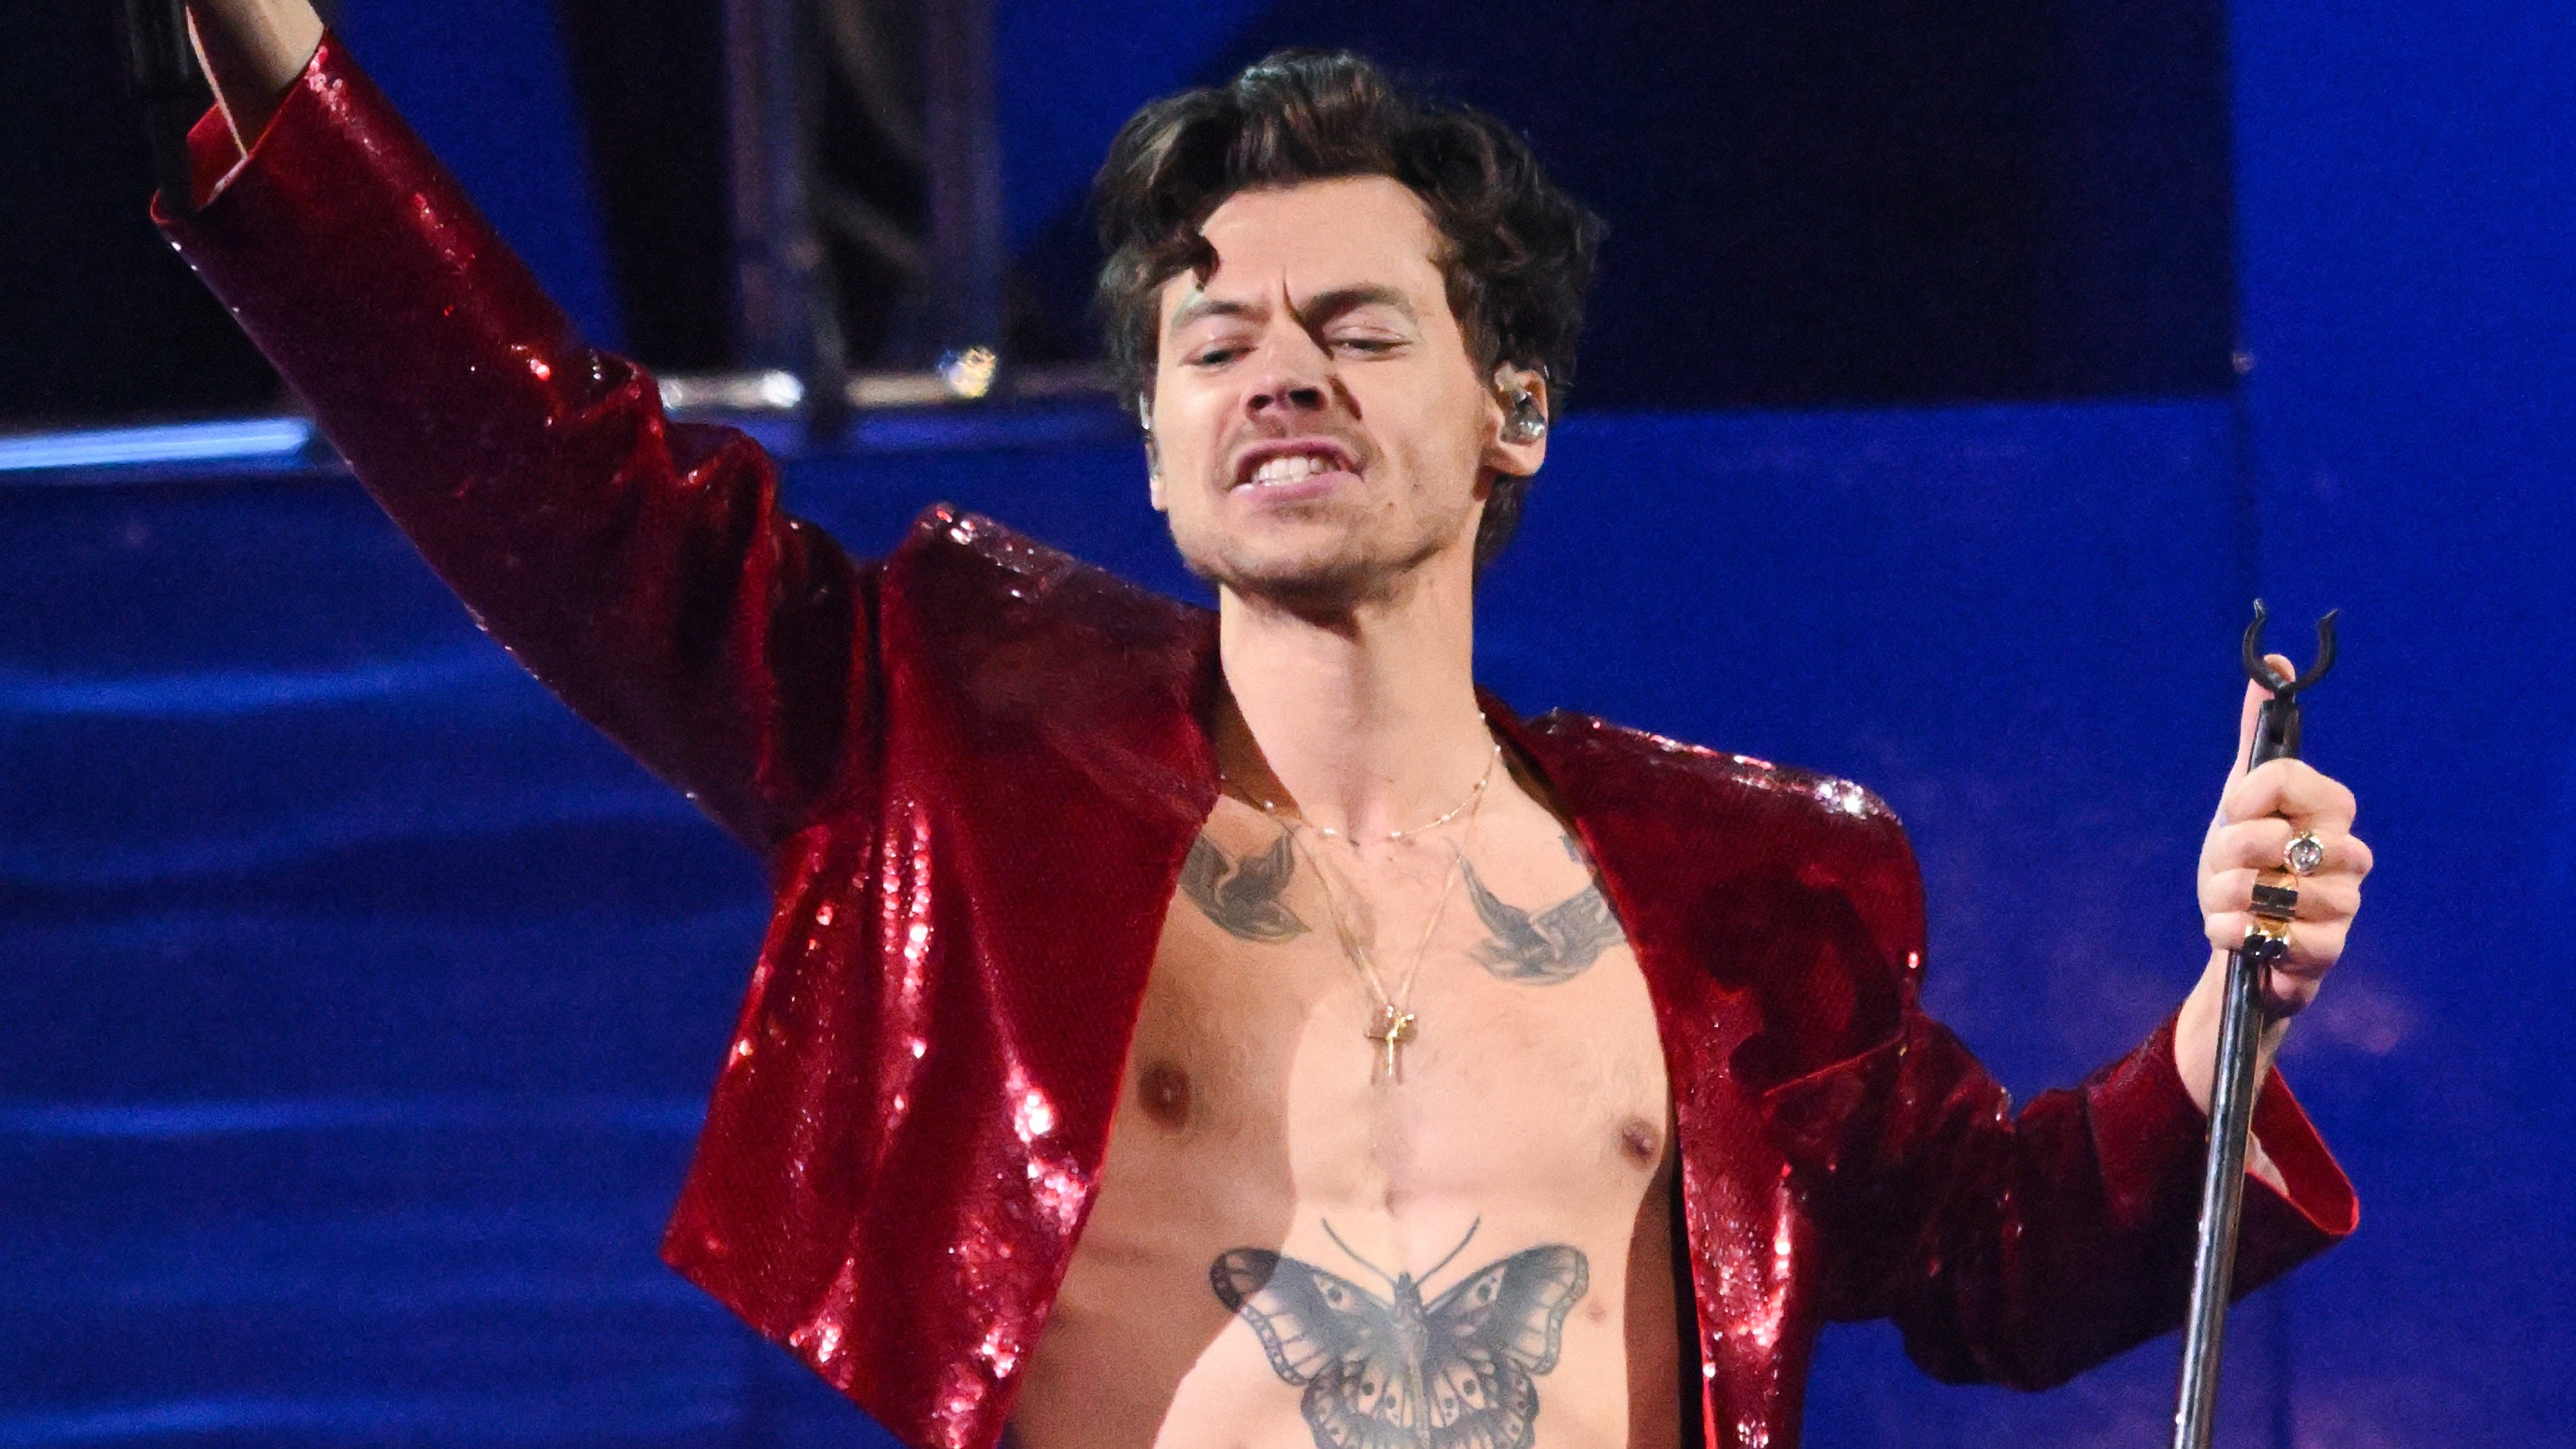 Harry Styles hit in the eye by hurled object during concert, in latest incident of recent trend